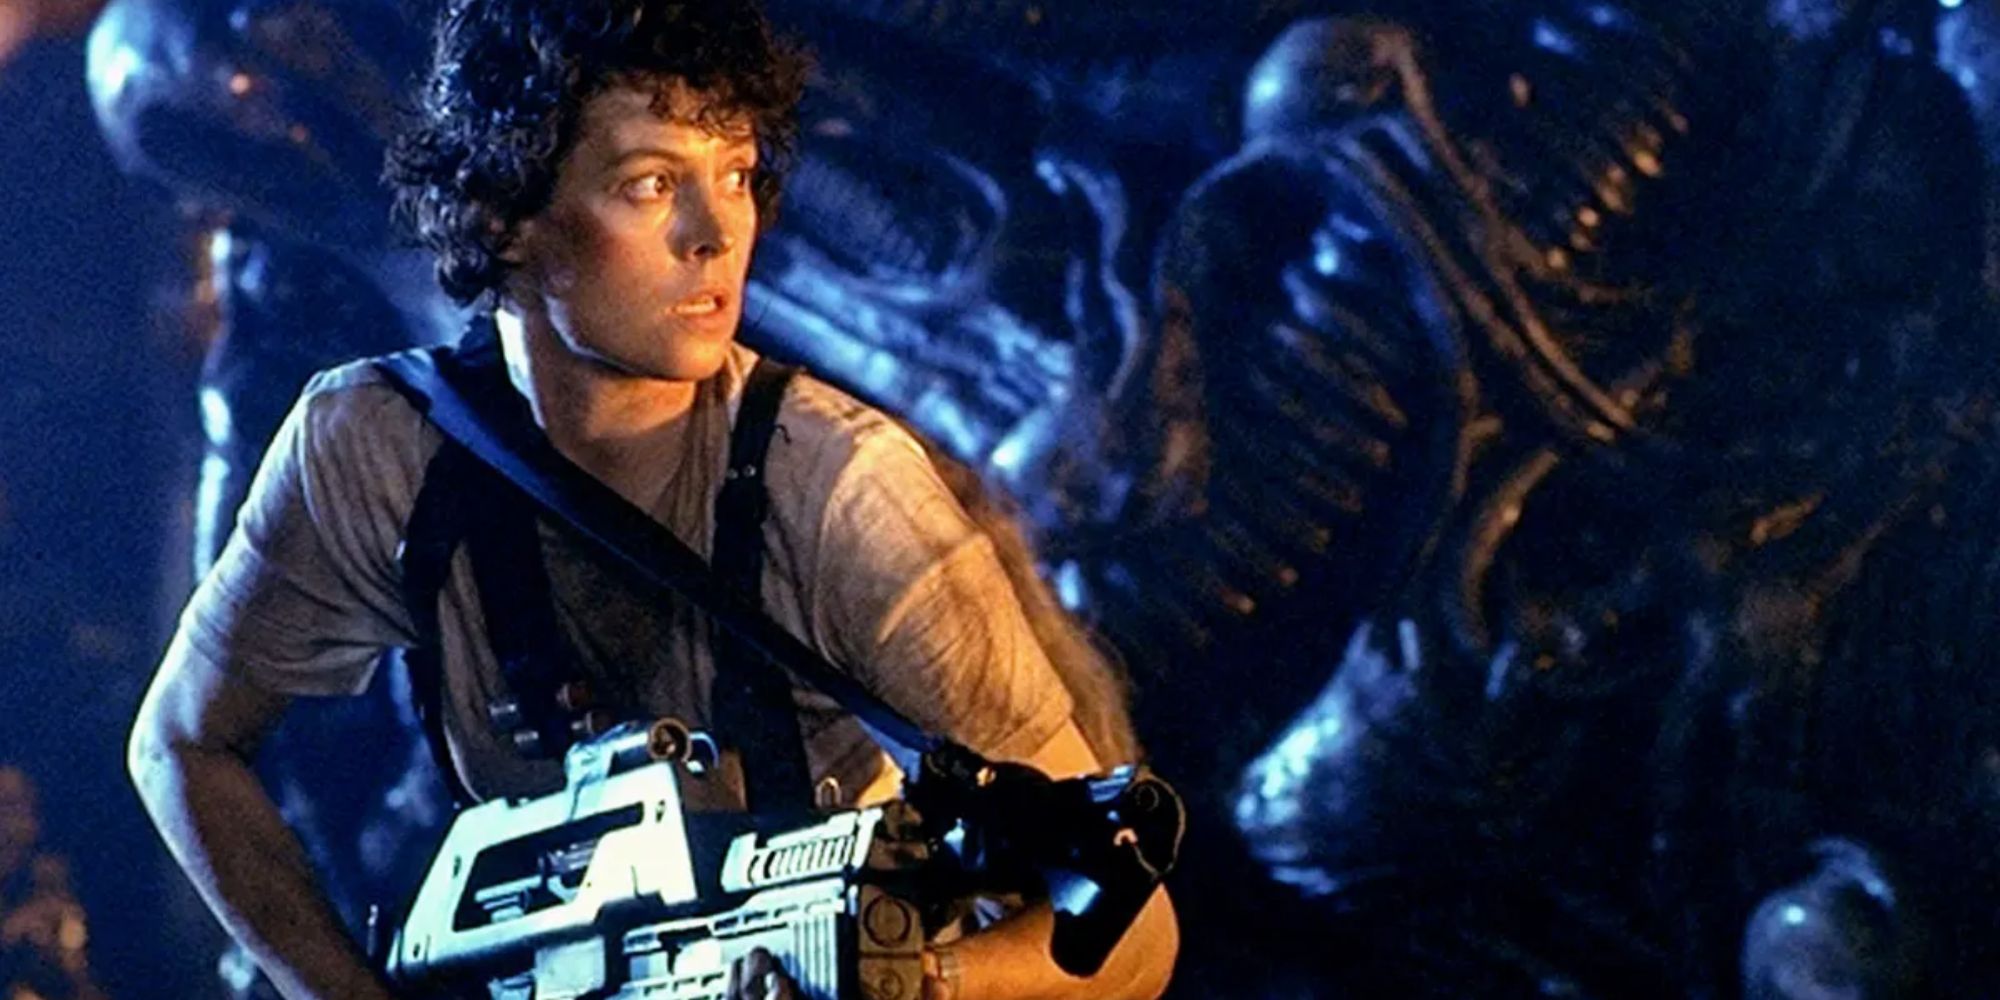 Sigourney Weaver as Ripley in 'Aliens' holding a large gun